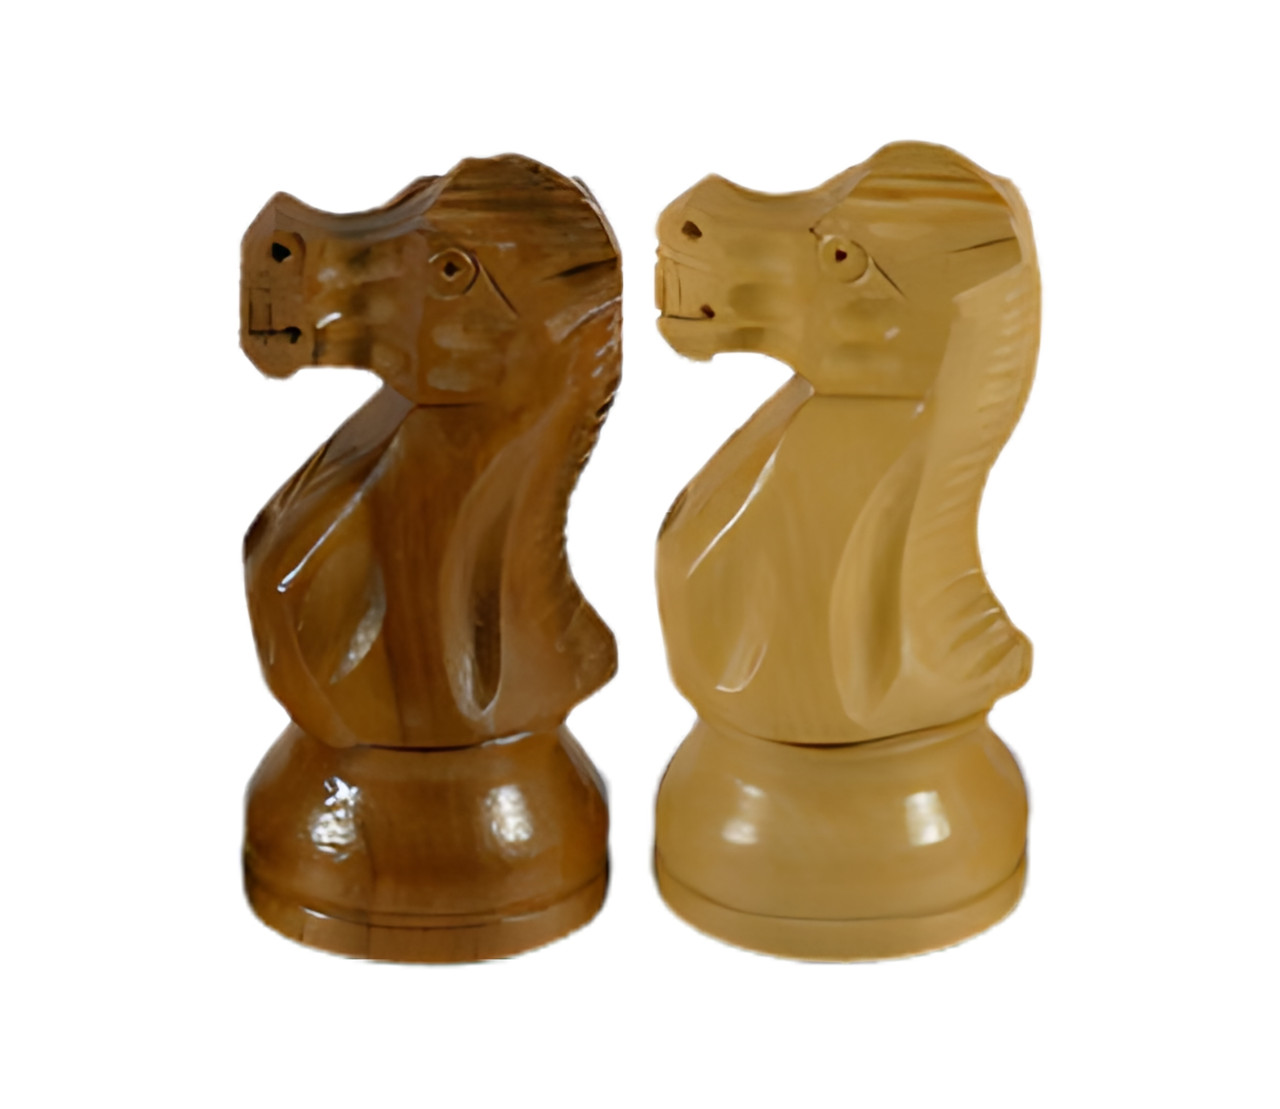 The Noble - Acacia & Boxwood French Knight Chess Pieces 3.75" King black and white knights